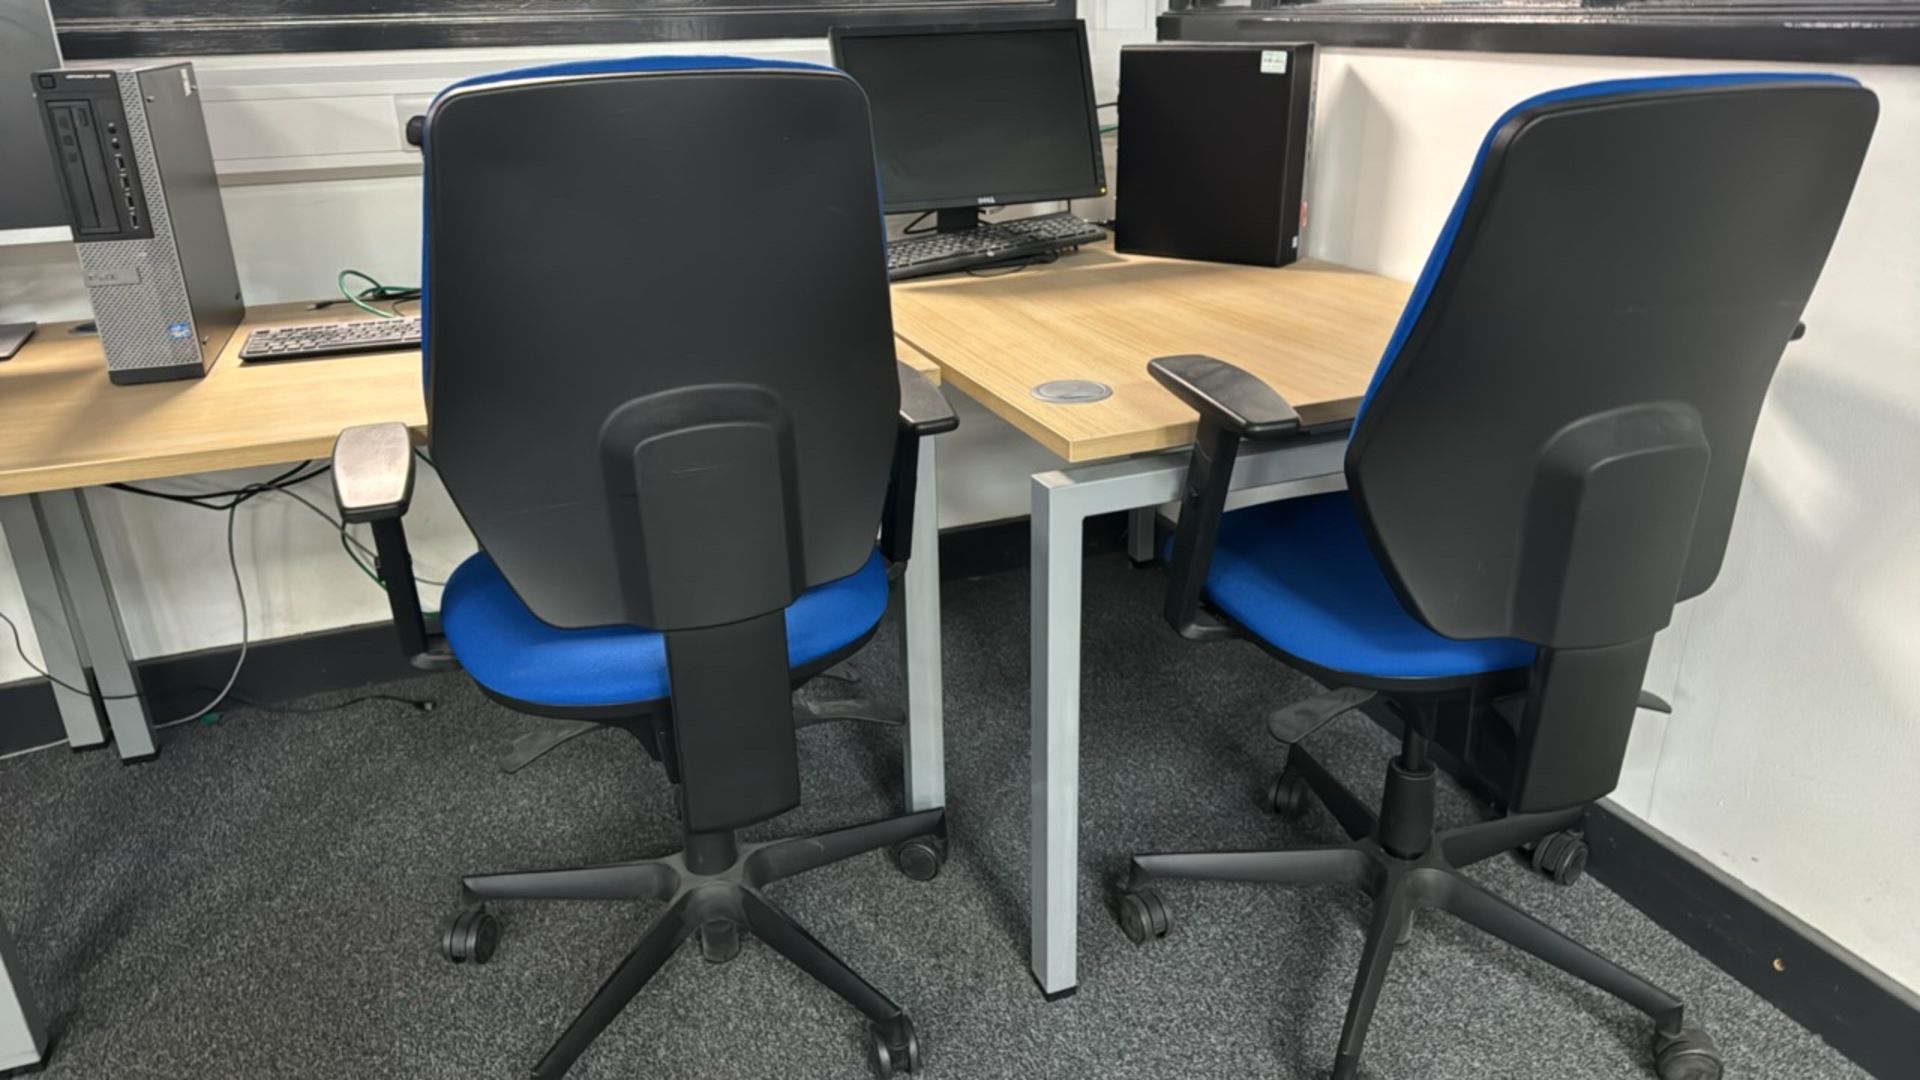 Bank Of 4 Desks & 4 Office Chairs - Image 5 of 6